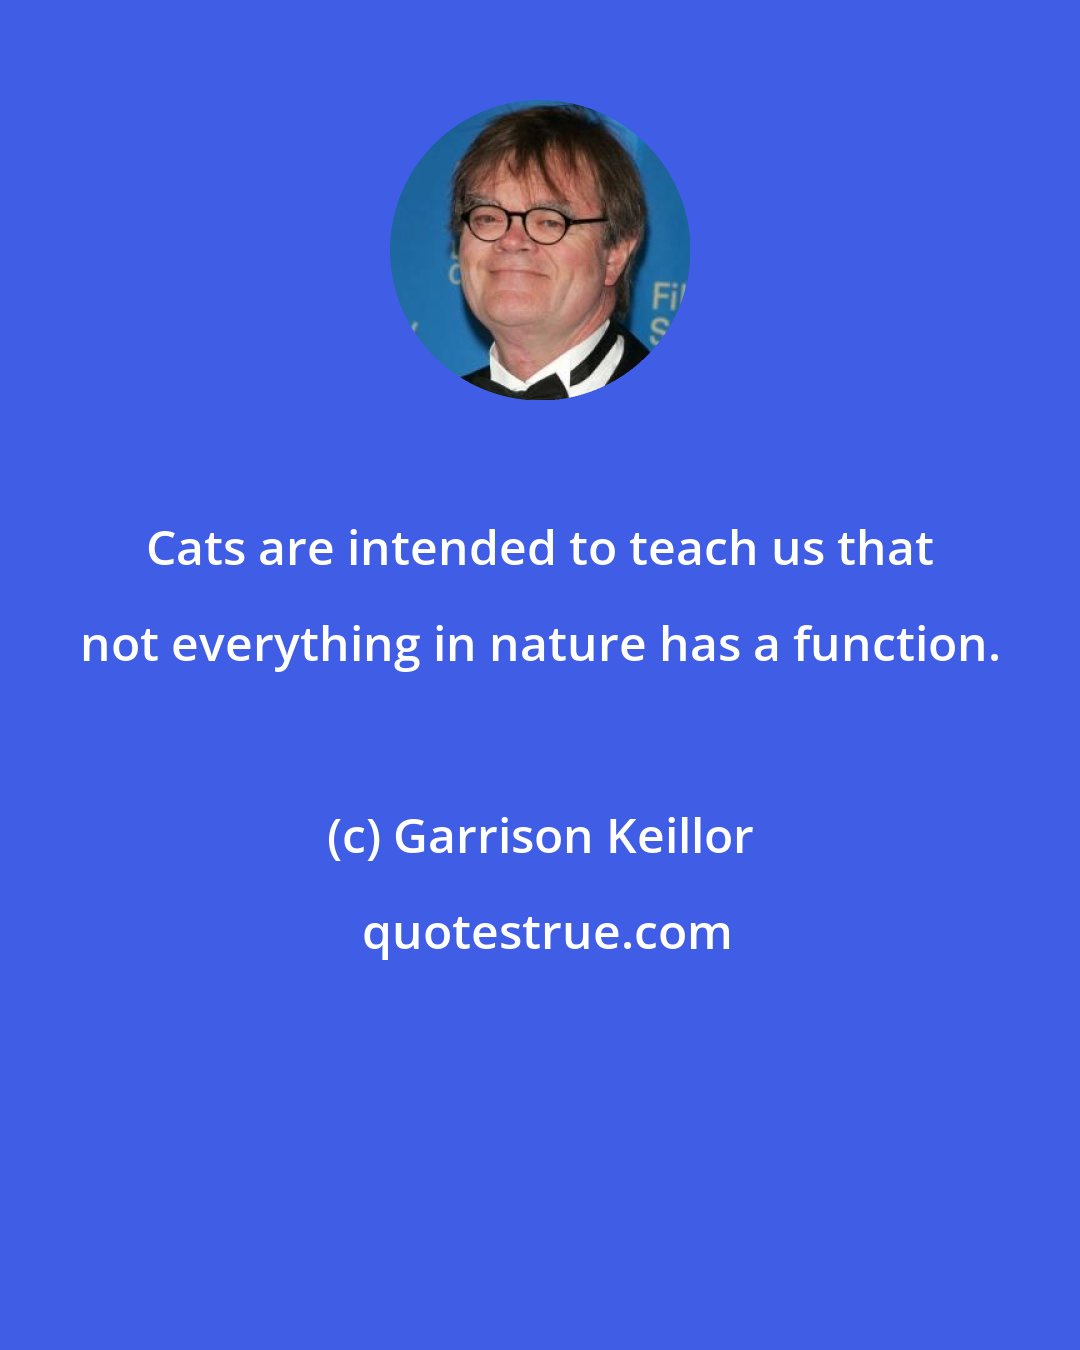 Garrison Keillor: Cats are intended to teach us that not everything in nature has a function.